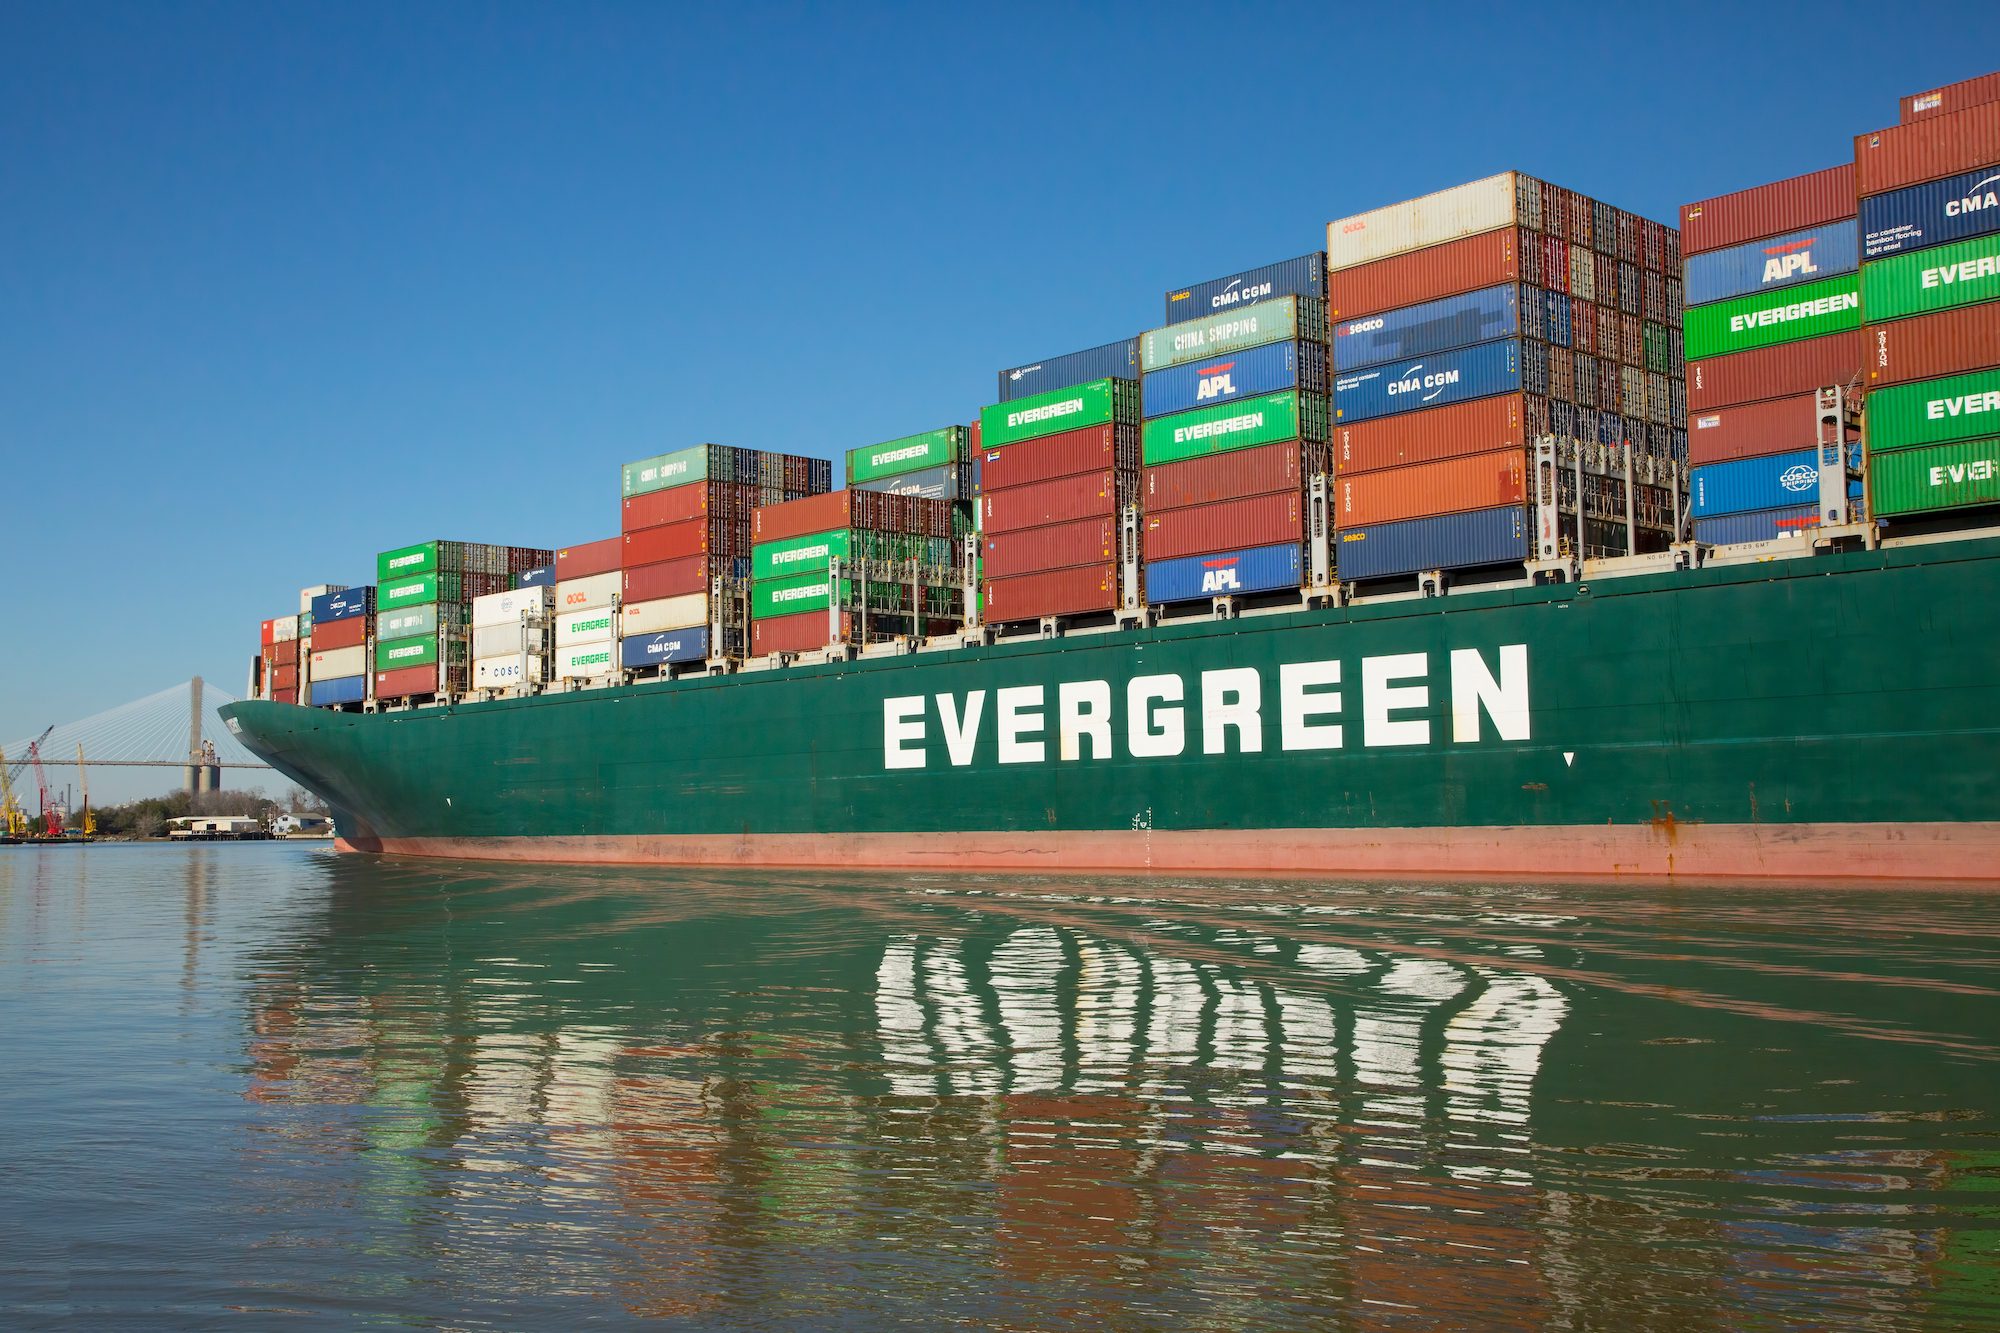 Stock photo of an Evergreen containership entering port